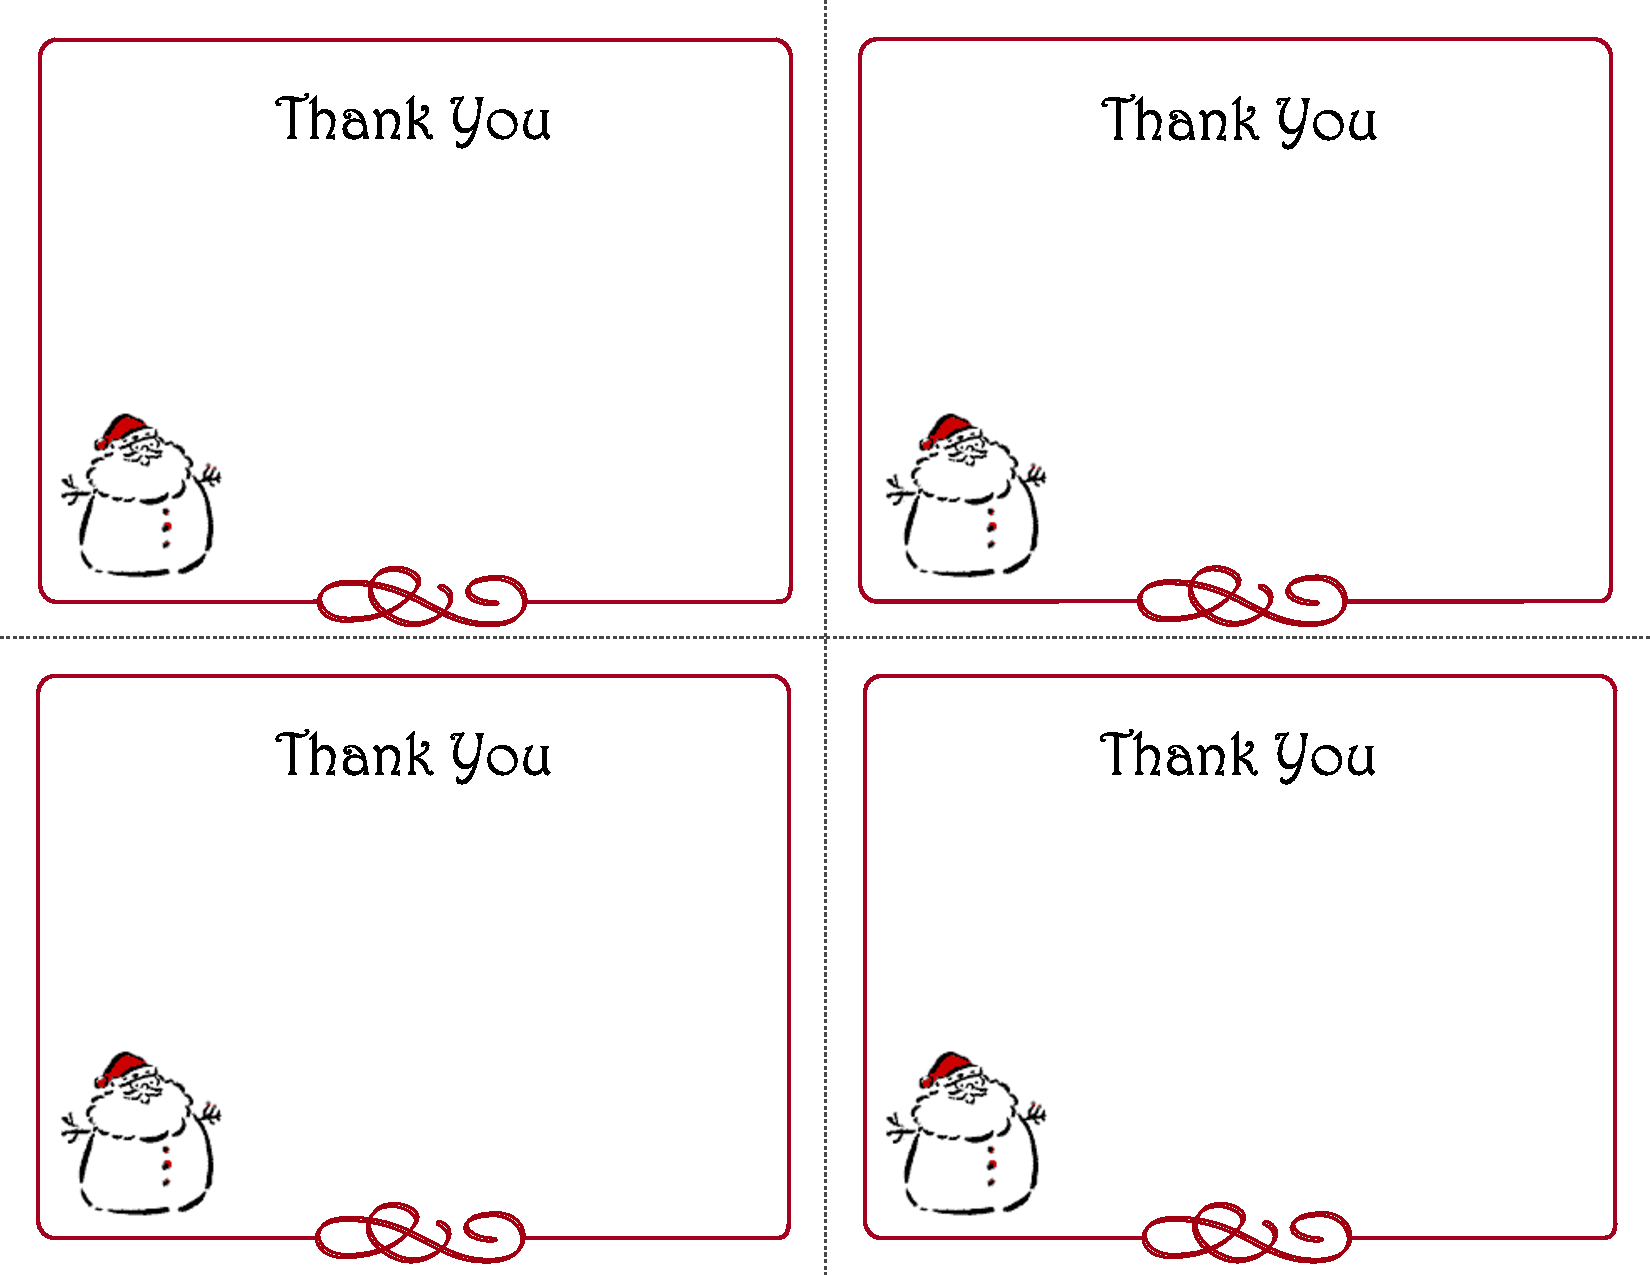 Free Thank You Cards Printable  Free Printable Holiday Gift Tags inside Christmas Thank You Card Templates Free